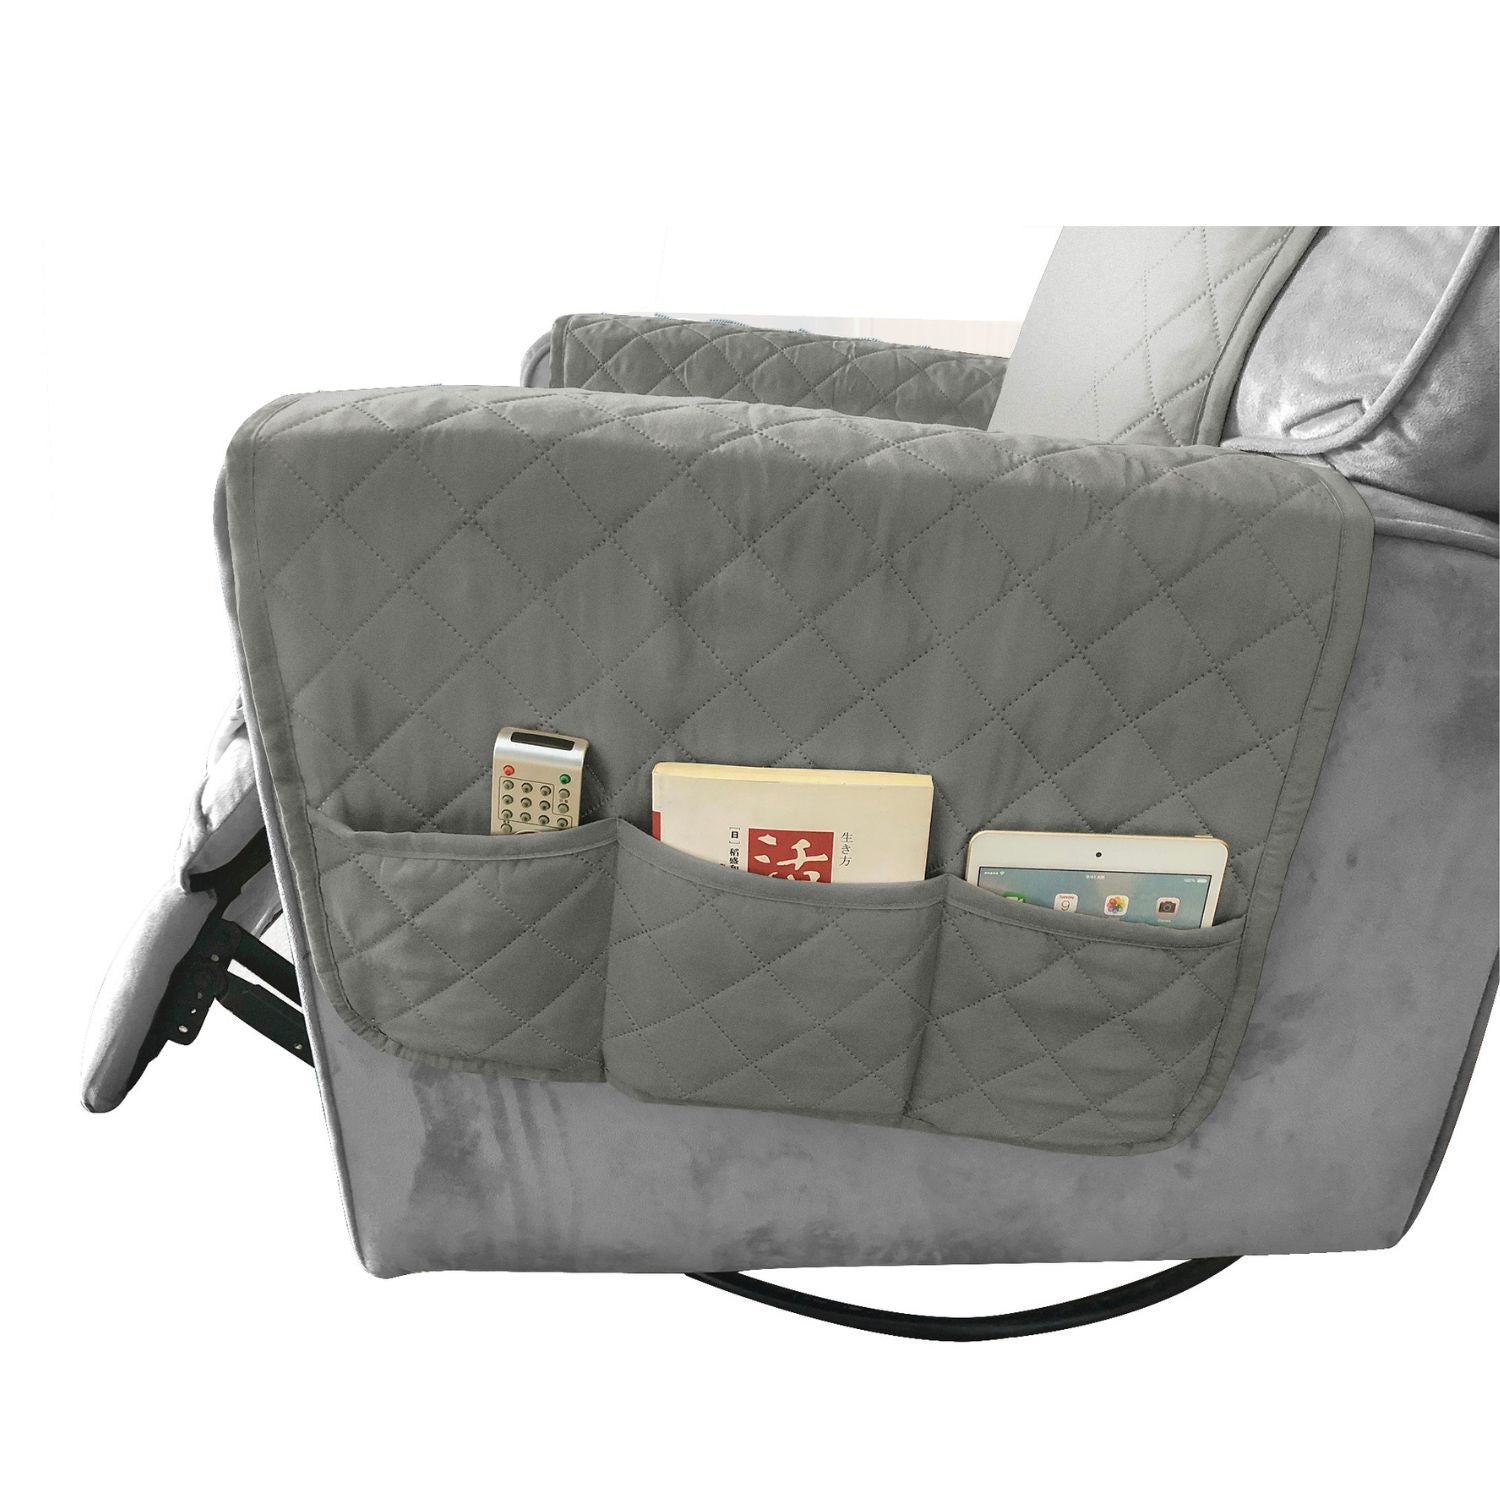 FLOOFI Pet Sofa Cover Recliner Chair L Size with Pocket (Light Grey)